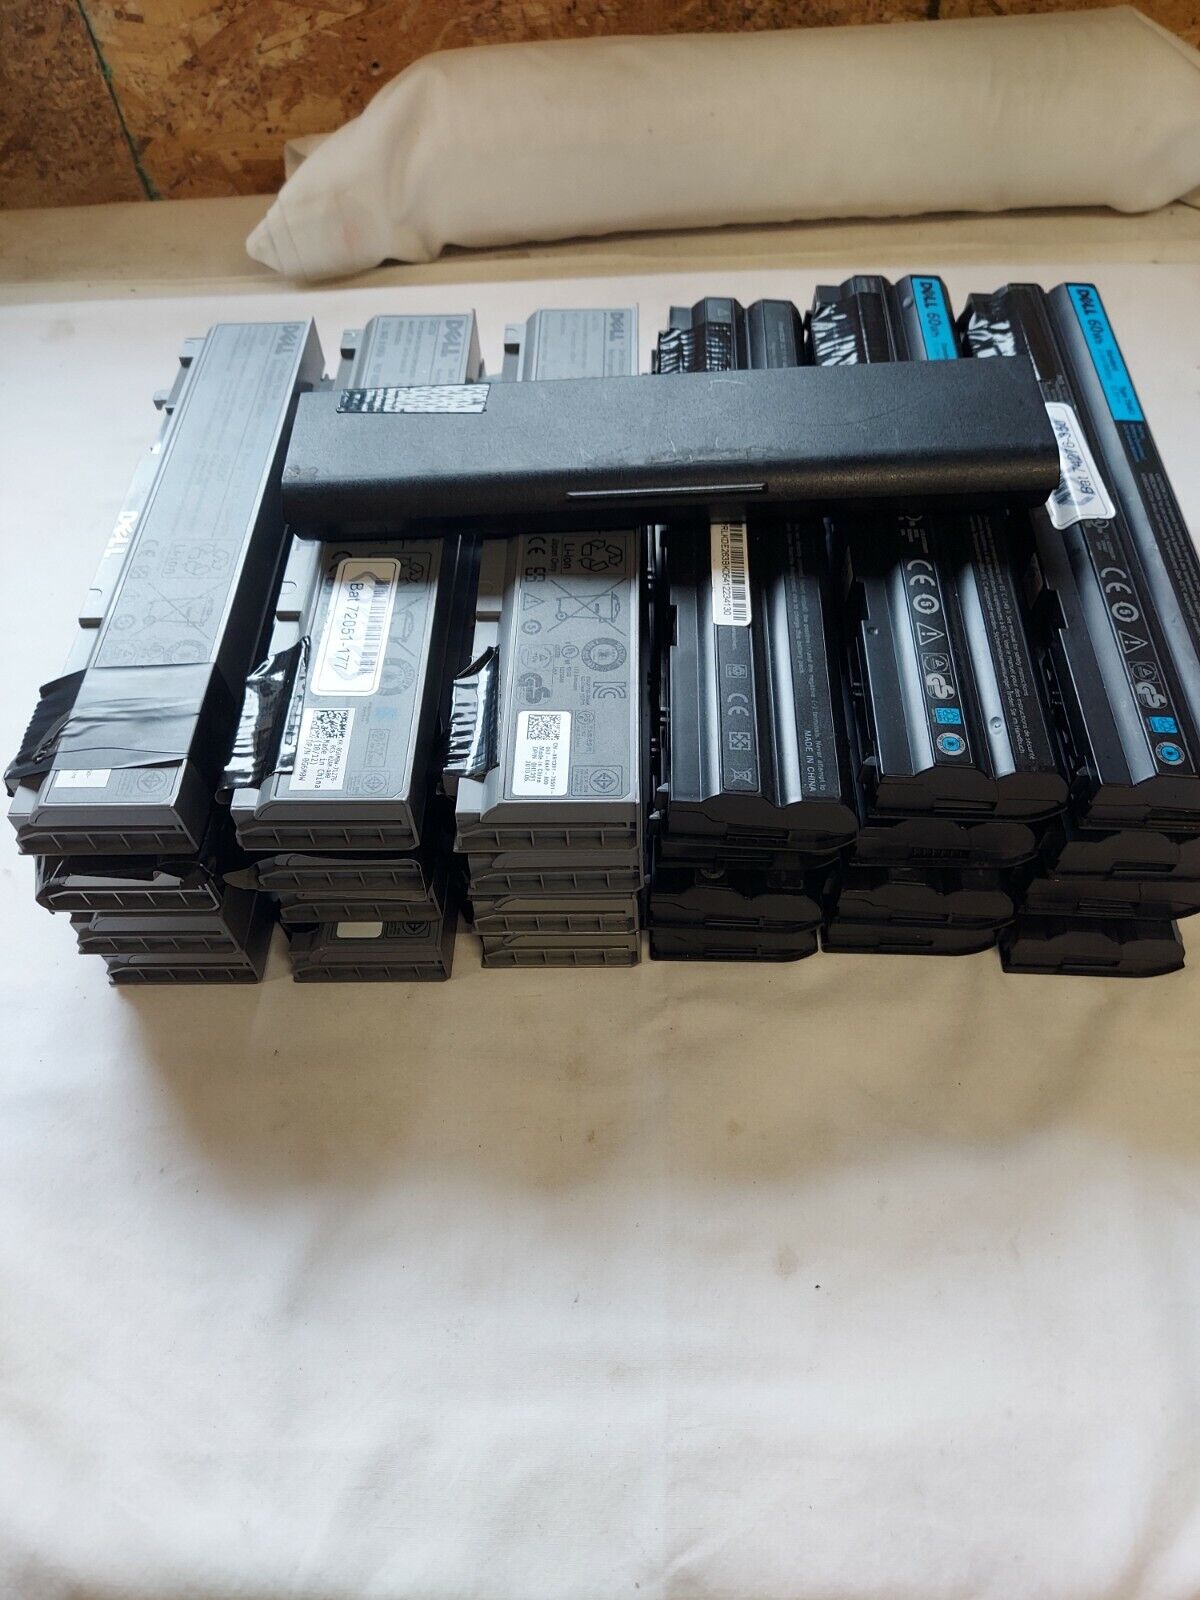 LOT OF 25 MIXED LITHIUM ION LAPTOP BATTERIES USED FOR CELL RECOVERY ONLY!!! Mixed Brands